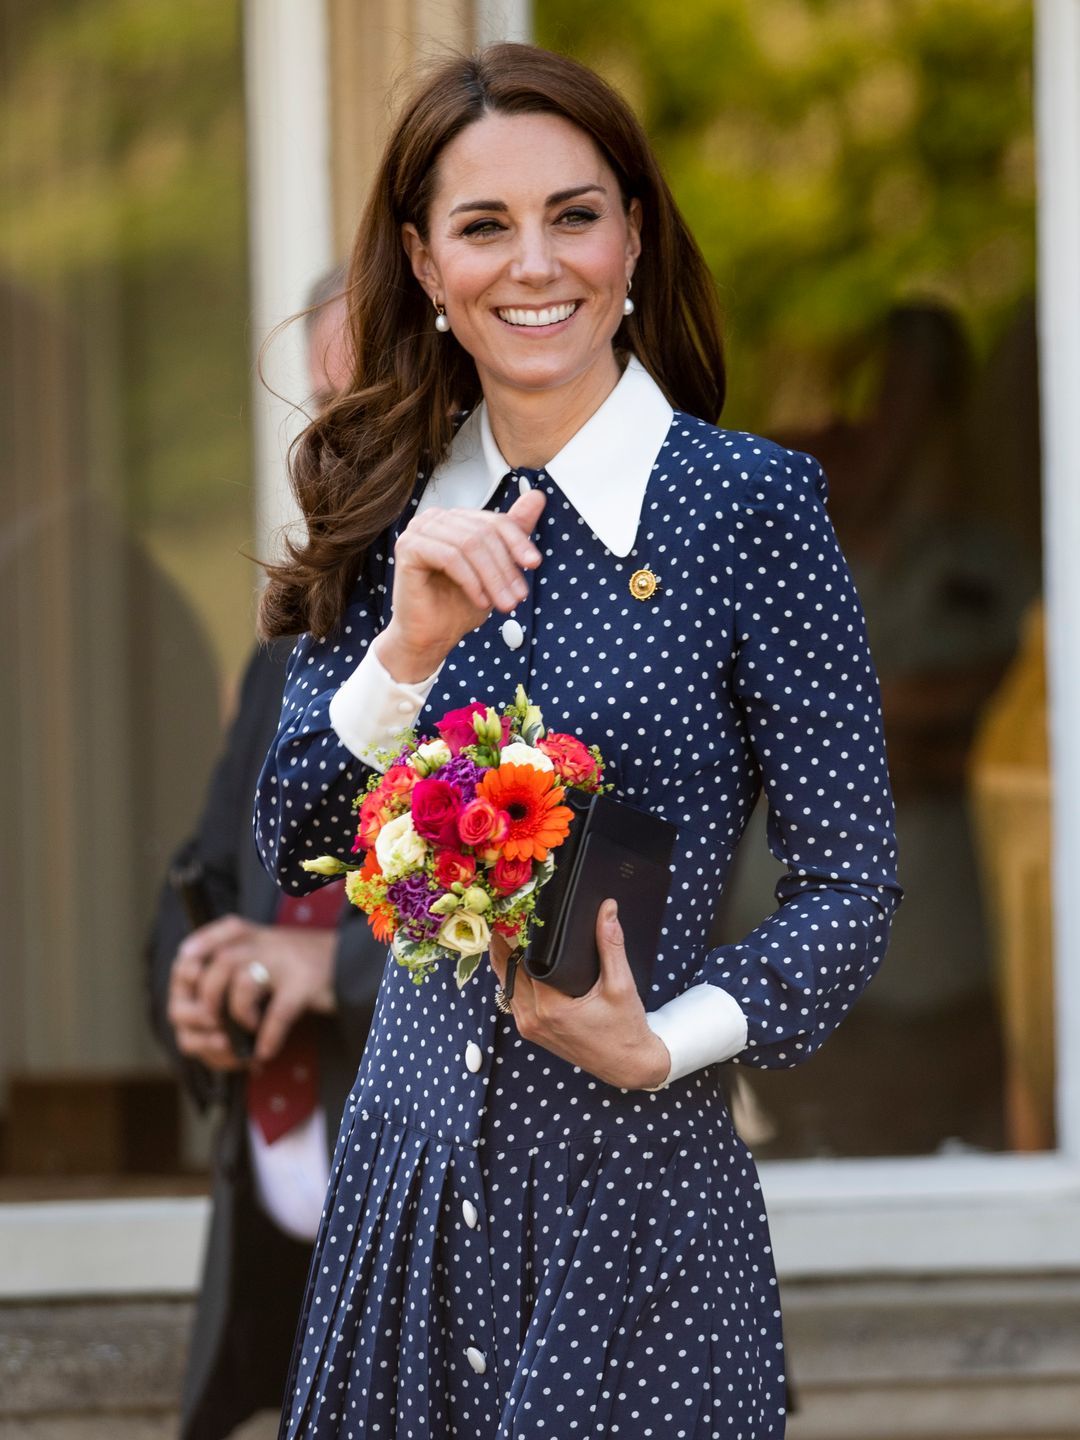 Princess Kate visits the D-Day exhibition at Bletchley Park on May 14, 2019 in Bletchley, England wearing an Alessandra Rich dress